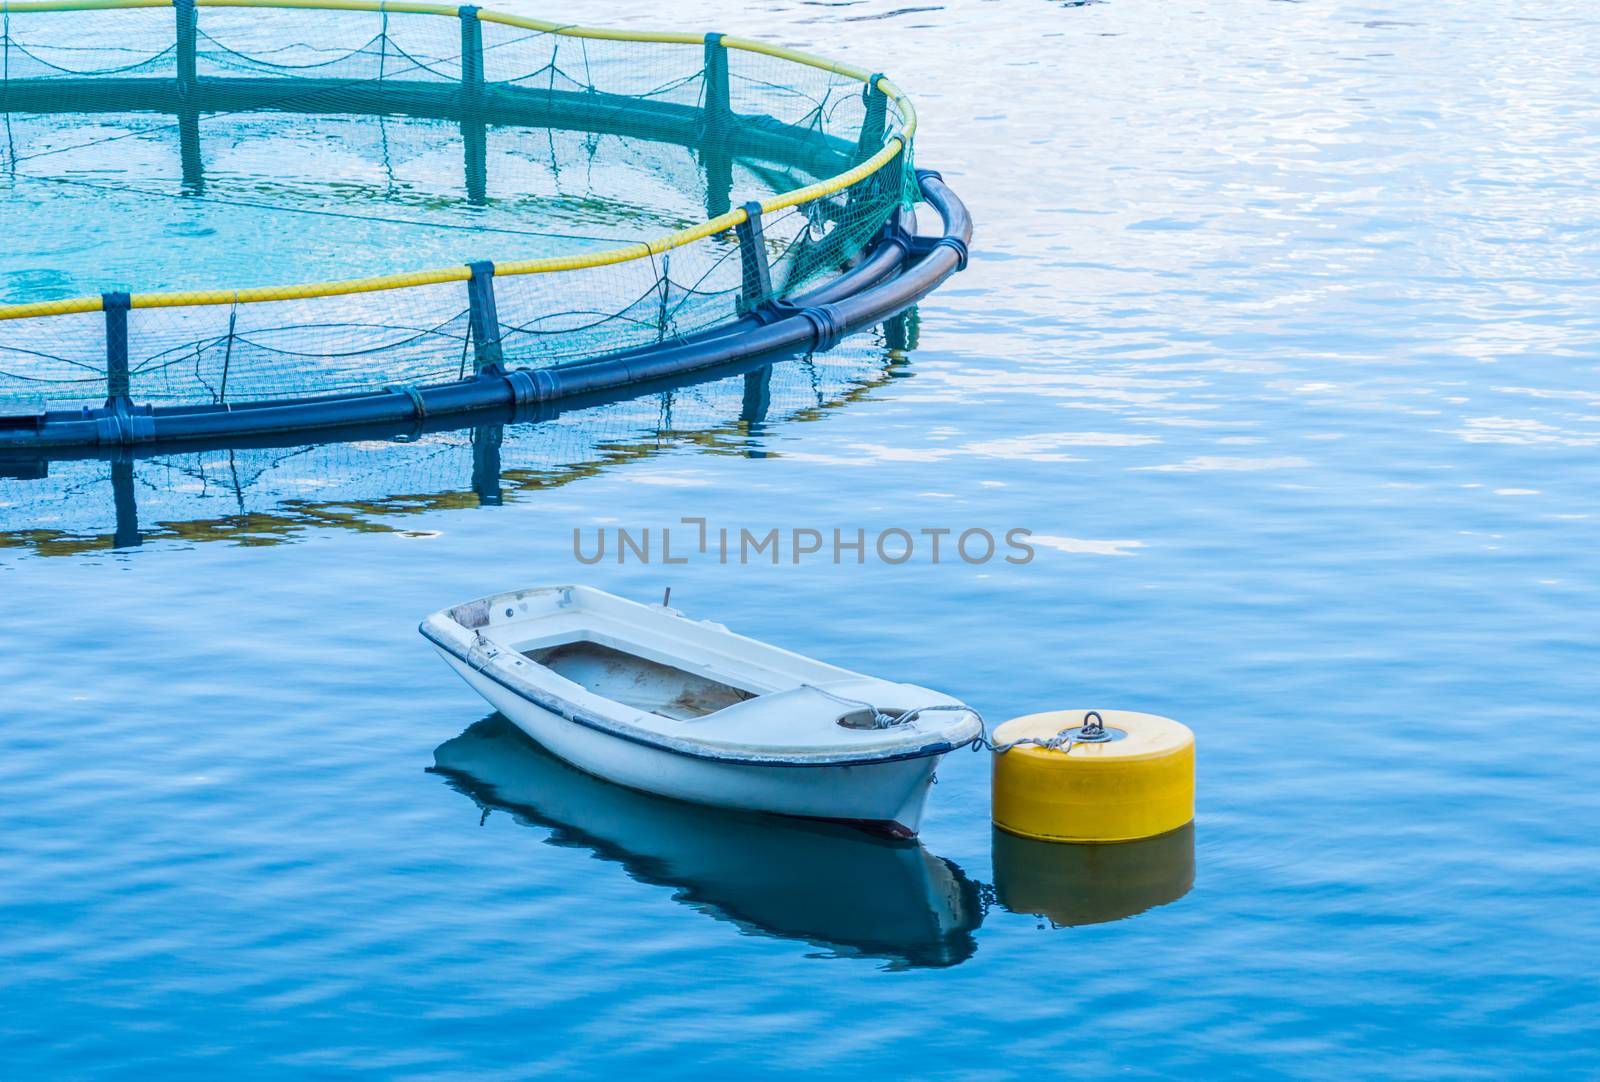 Cages for fish farming and the boat by radzonimo